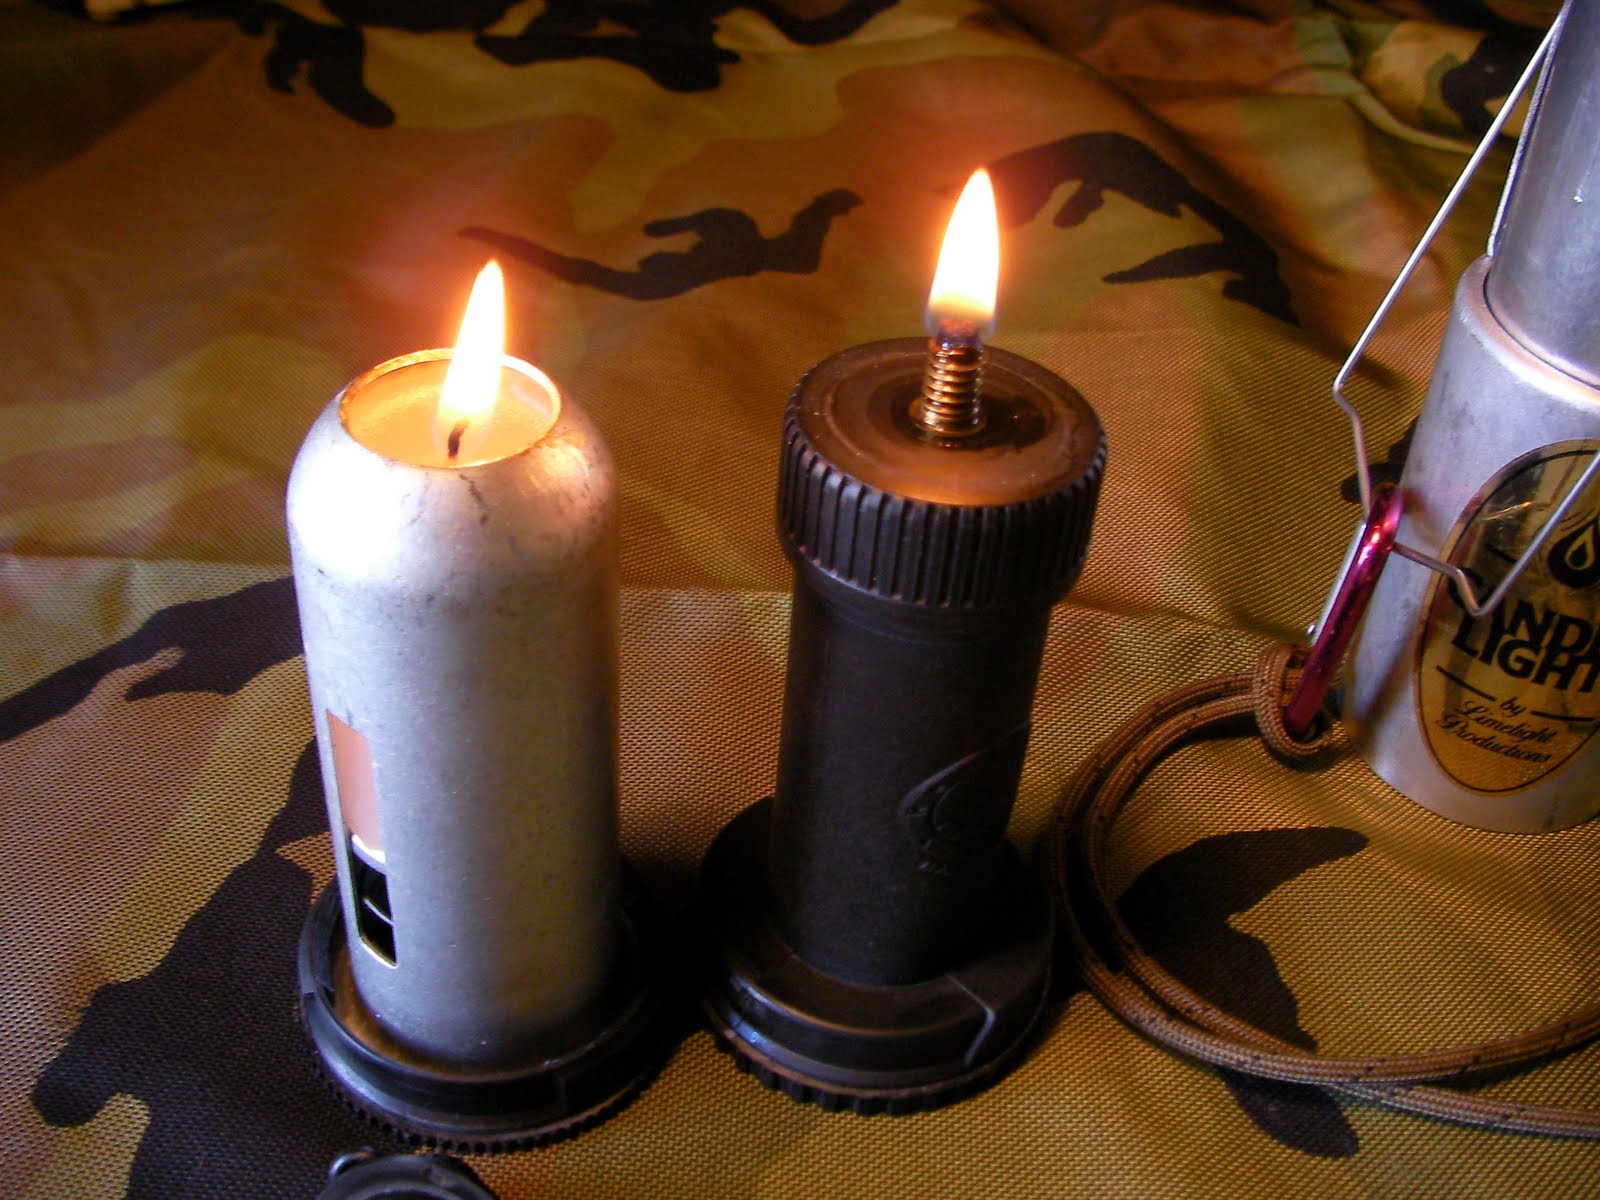 What does a survival guide think about Candle Lanterns?